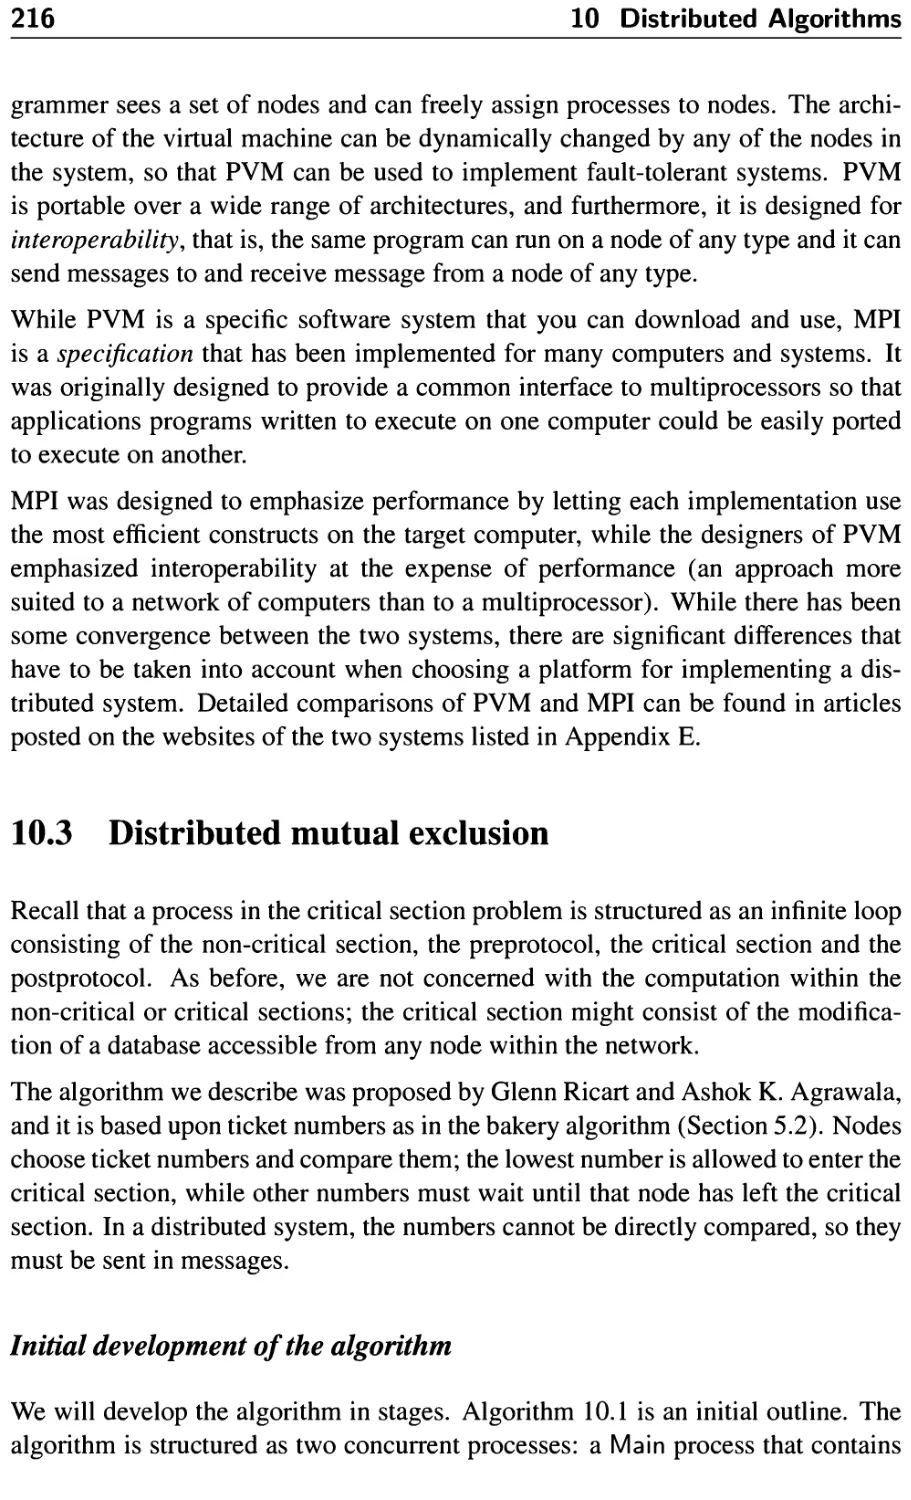 10.3 Distributed mutual exclusion